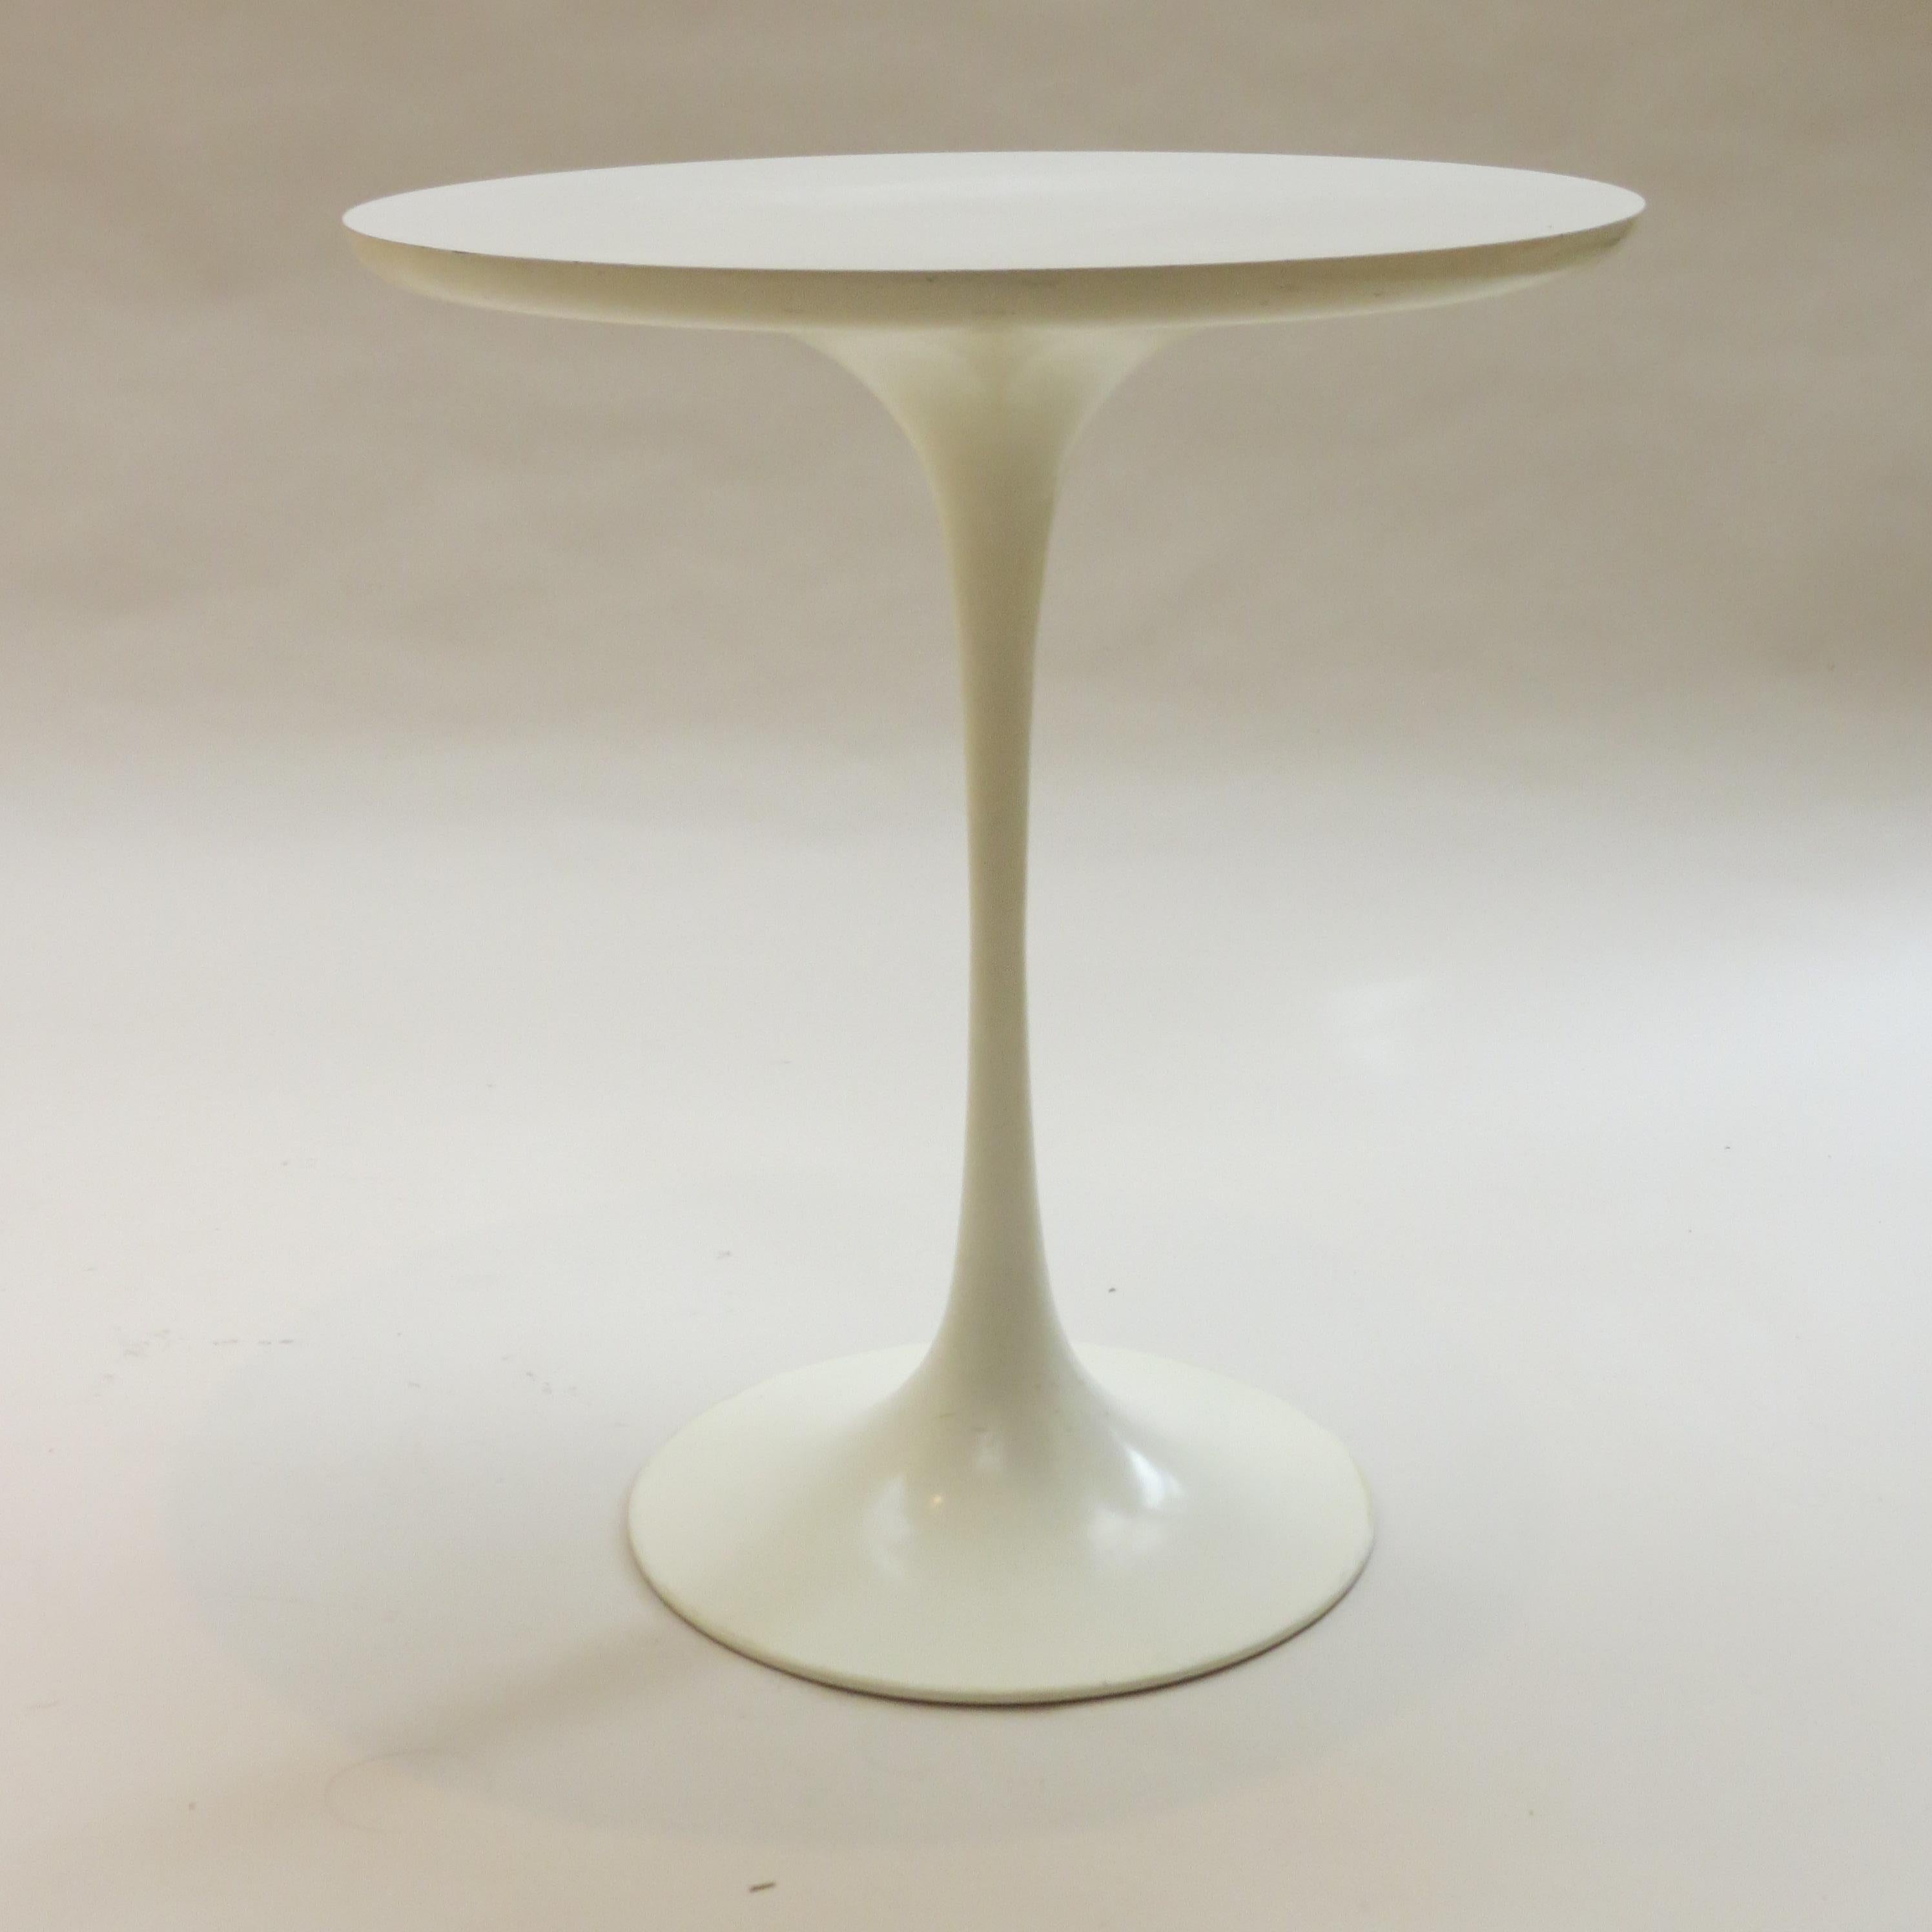 Pair of 1960s Tulip Side Table Designed by Maurice Burke for Arkana, Bath, UK 1